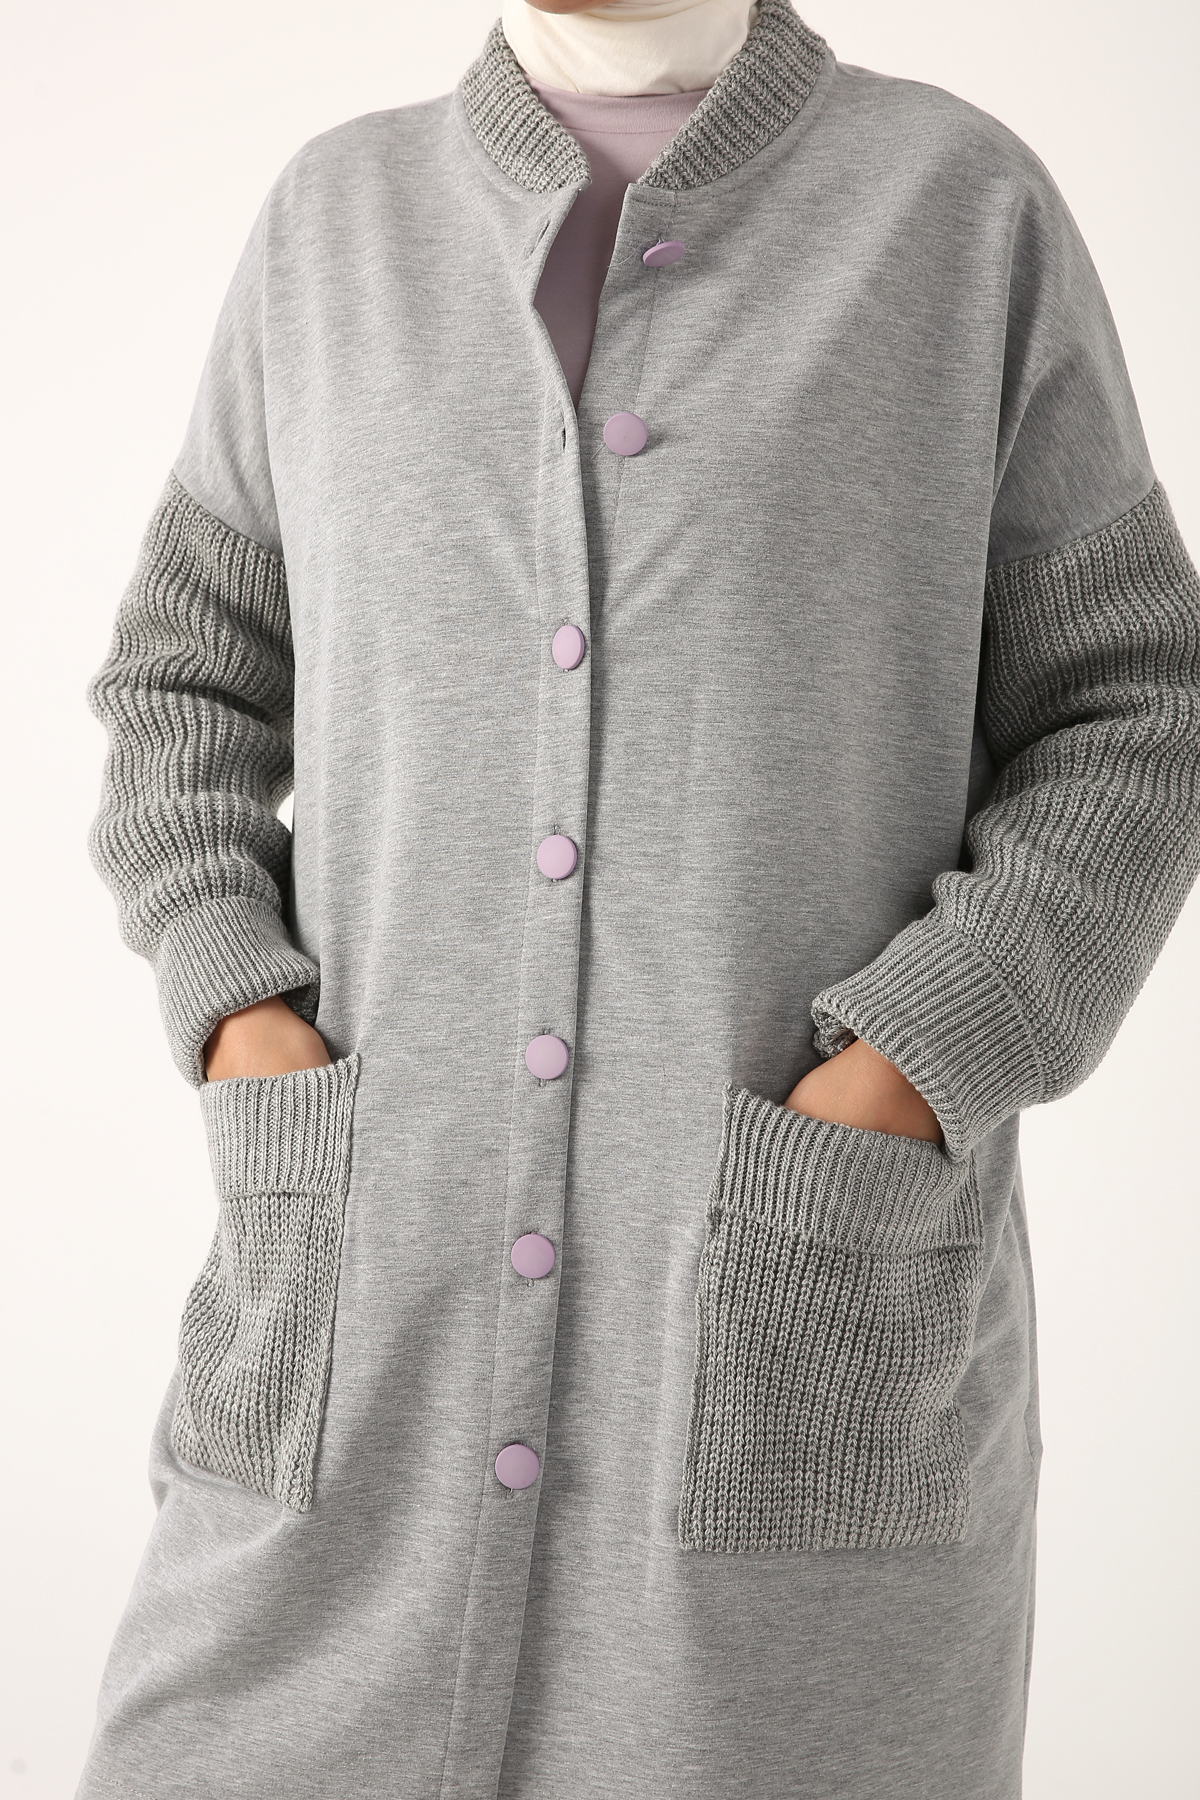 Knitwear Comfy Buttoned Cardigan